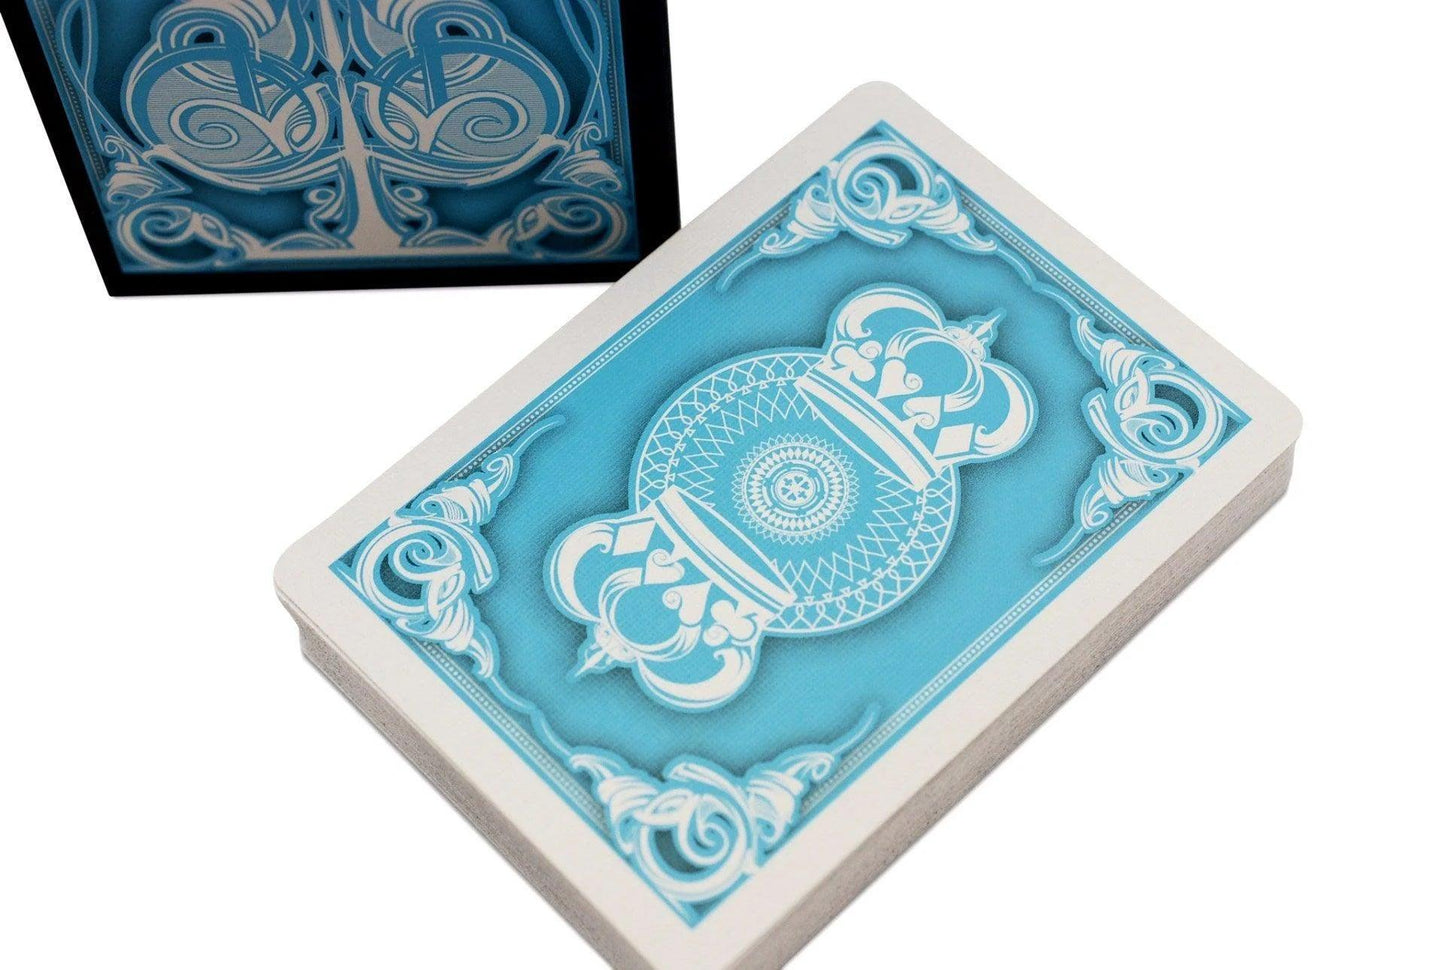 Light Blue Crown Deck Playing Cards - Eclipse Games Puzzles Novelties